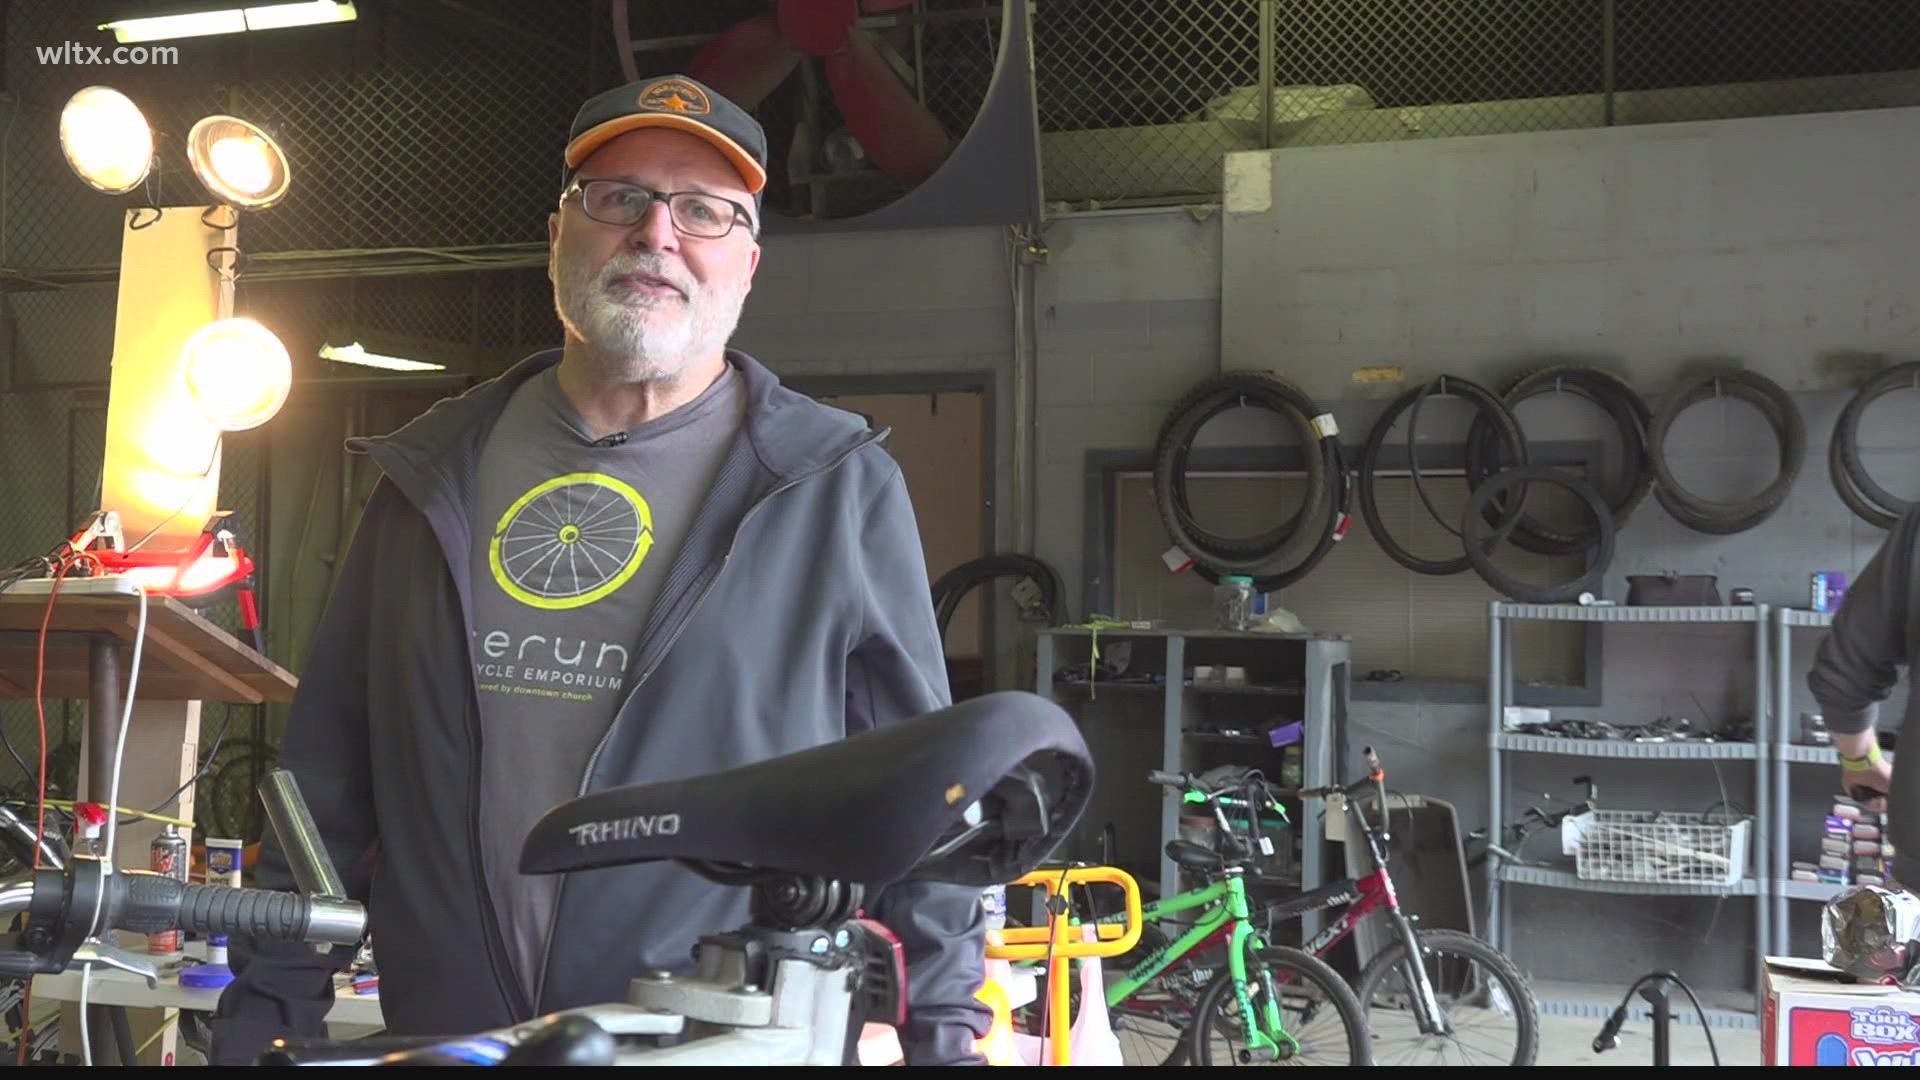 The Rerun program at Downtown Church in Columbia refurbishes bicycles for those in need